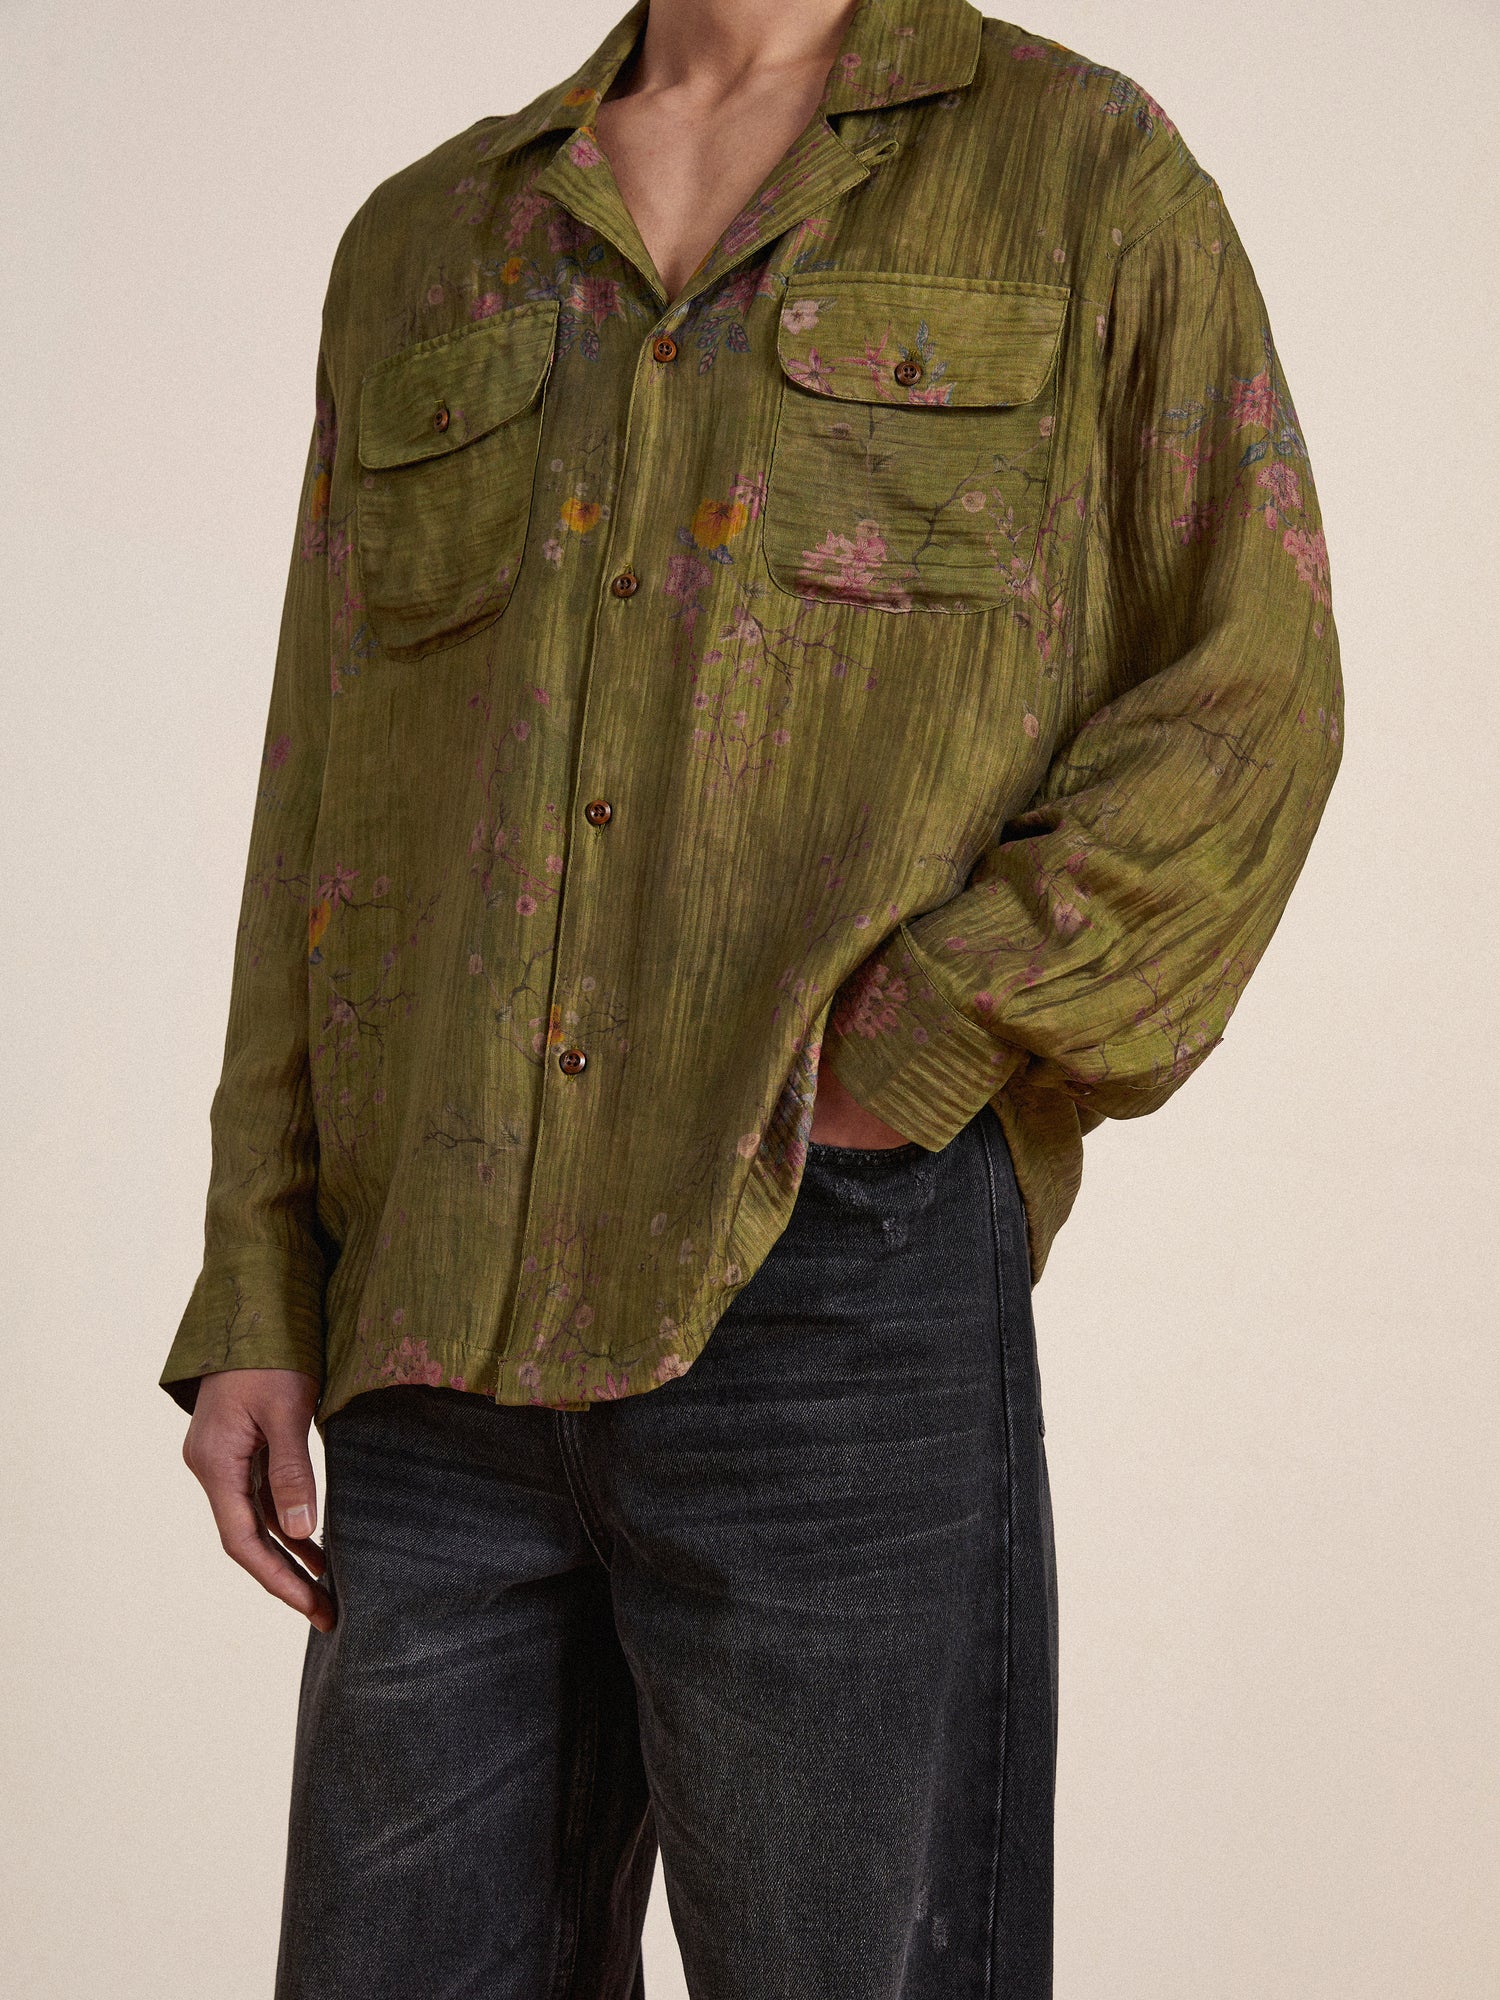 A man wearing a Found Floral Moss Long Sleeve Camp Shirt and jeans.